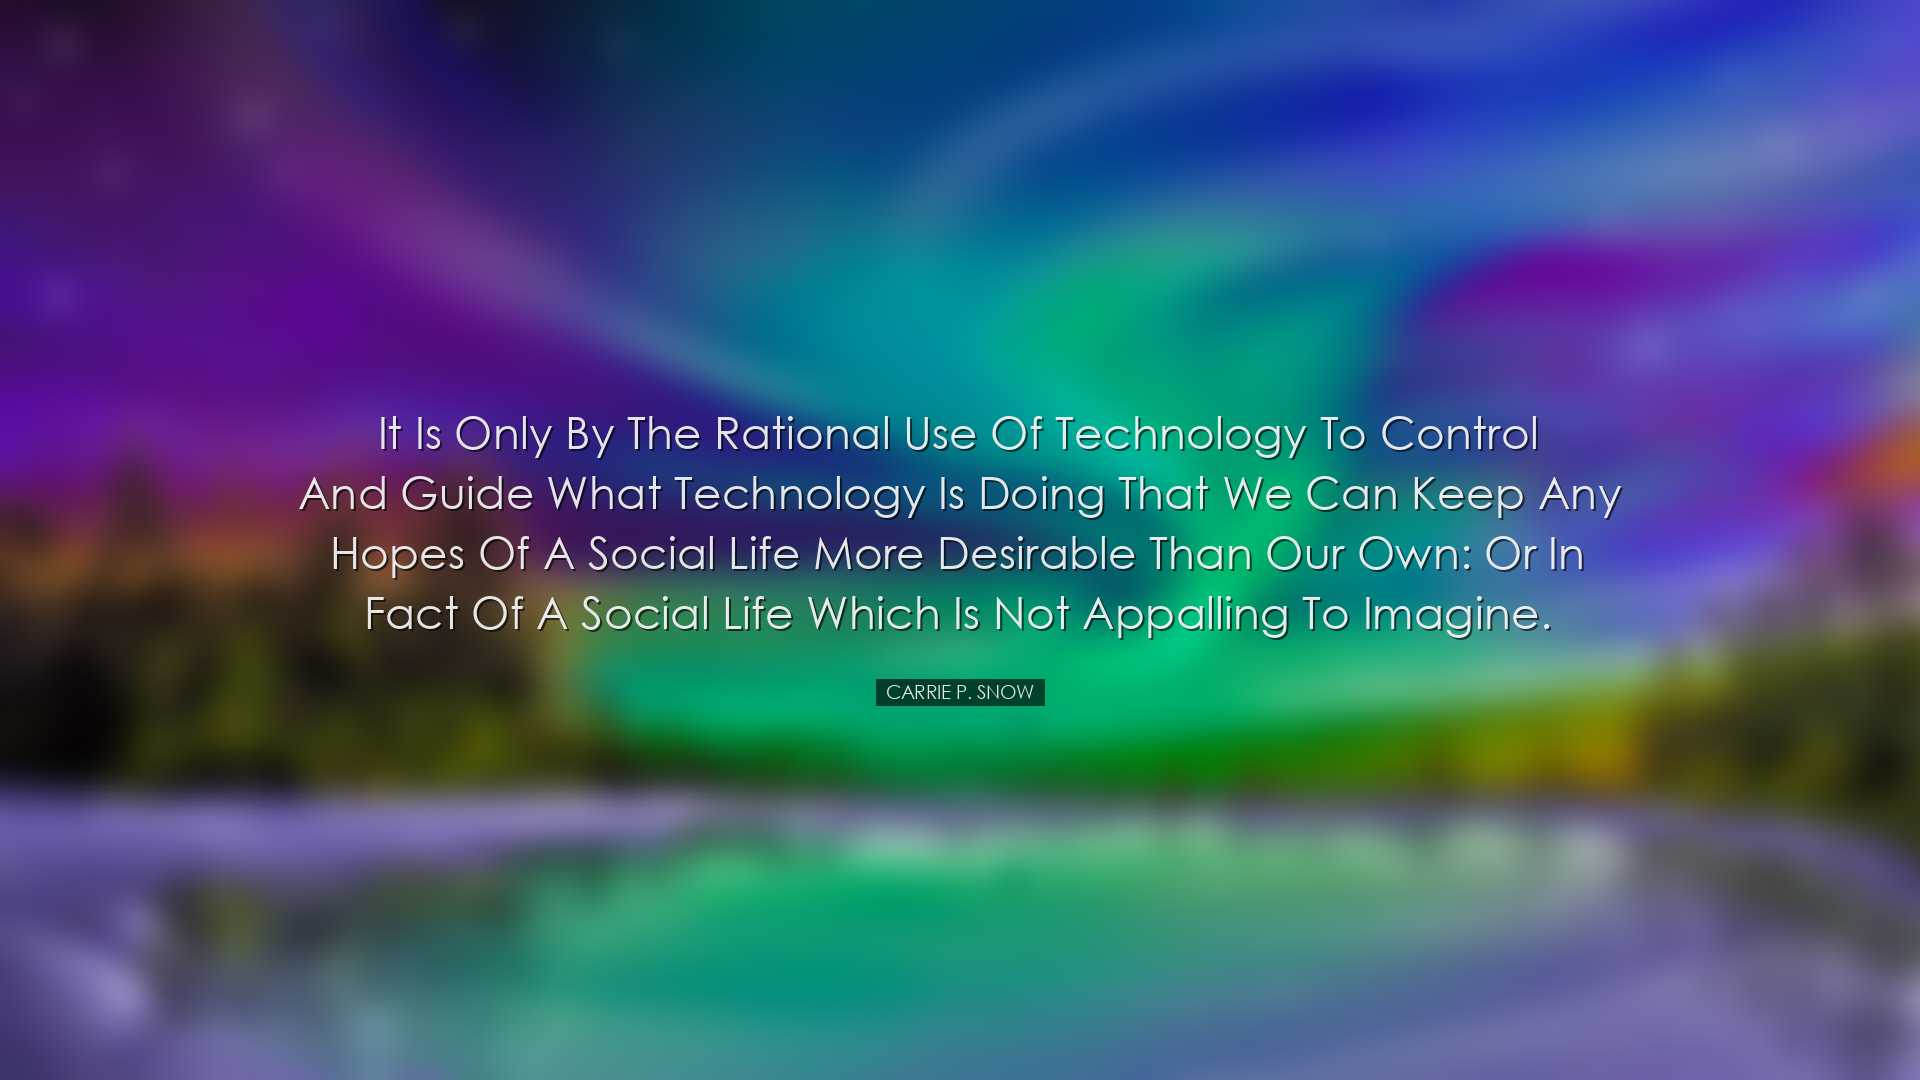 It is only by the rational use of technology to control and guide